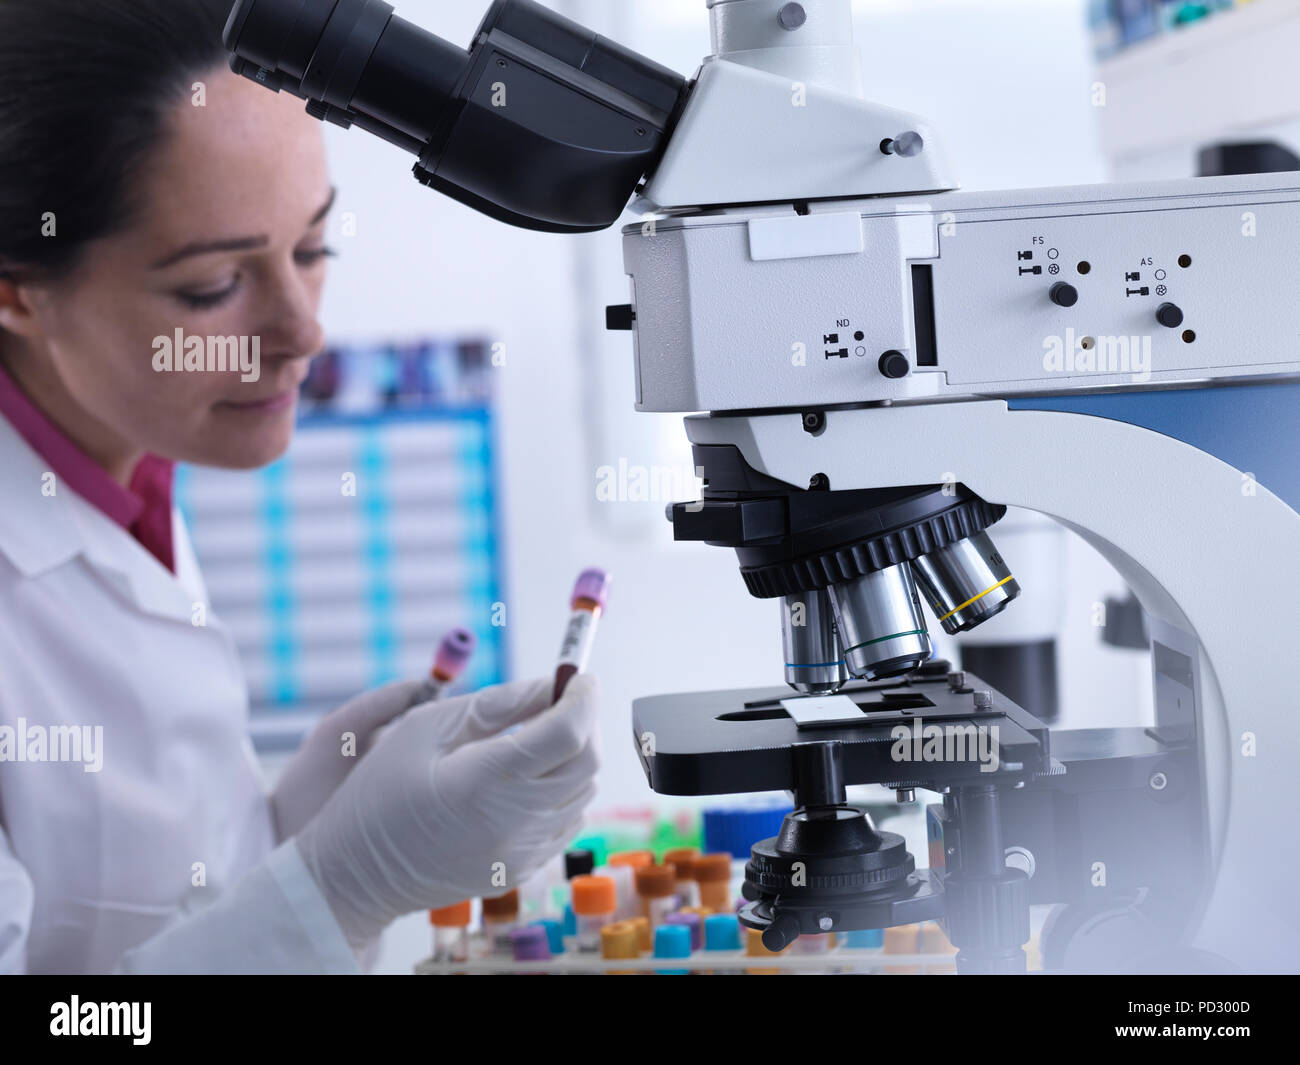 Scientist examining bar code and label on blood sample before medical testing Stock Photo